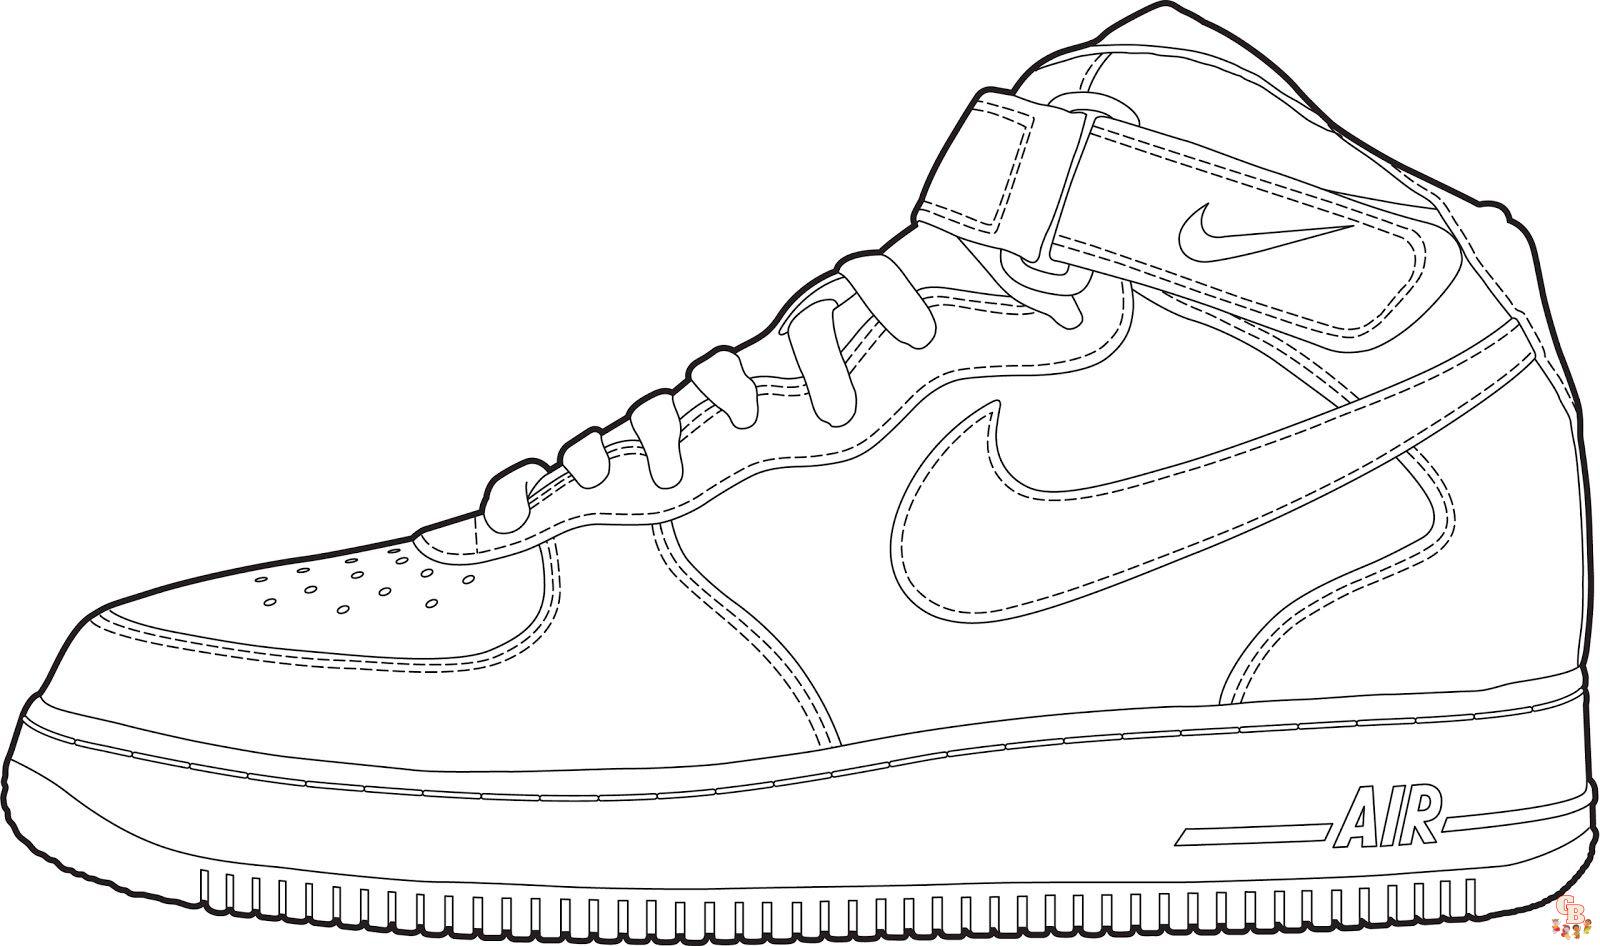 Enjoy Coloring Your Favorite Nike Shoes with Nike Coloring Pages